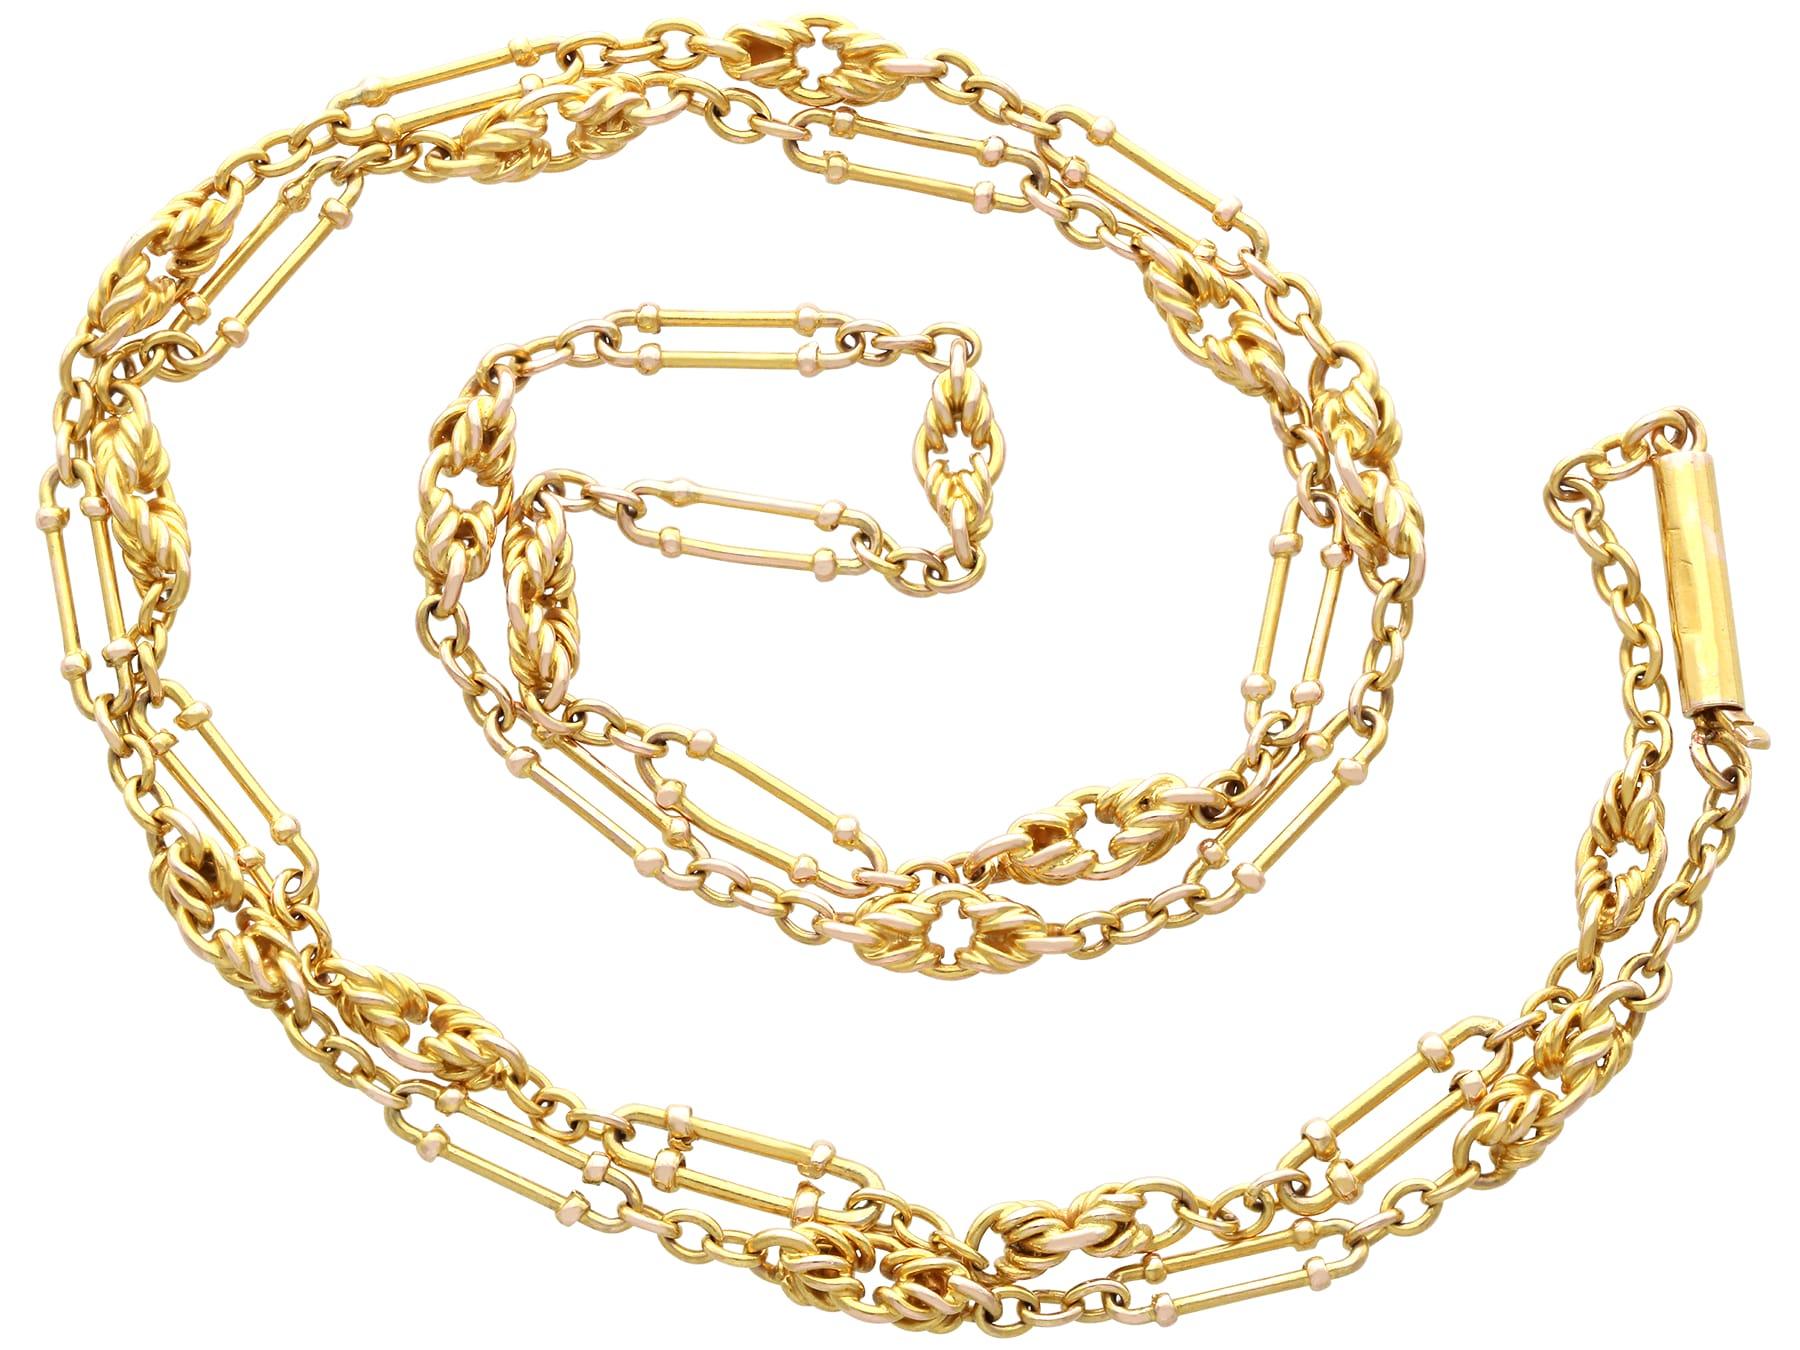 Women's or Men's Edwardian 14k Yellow Gold Chain For Sale